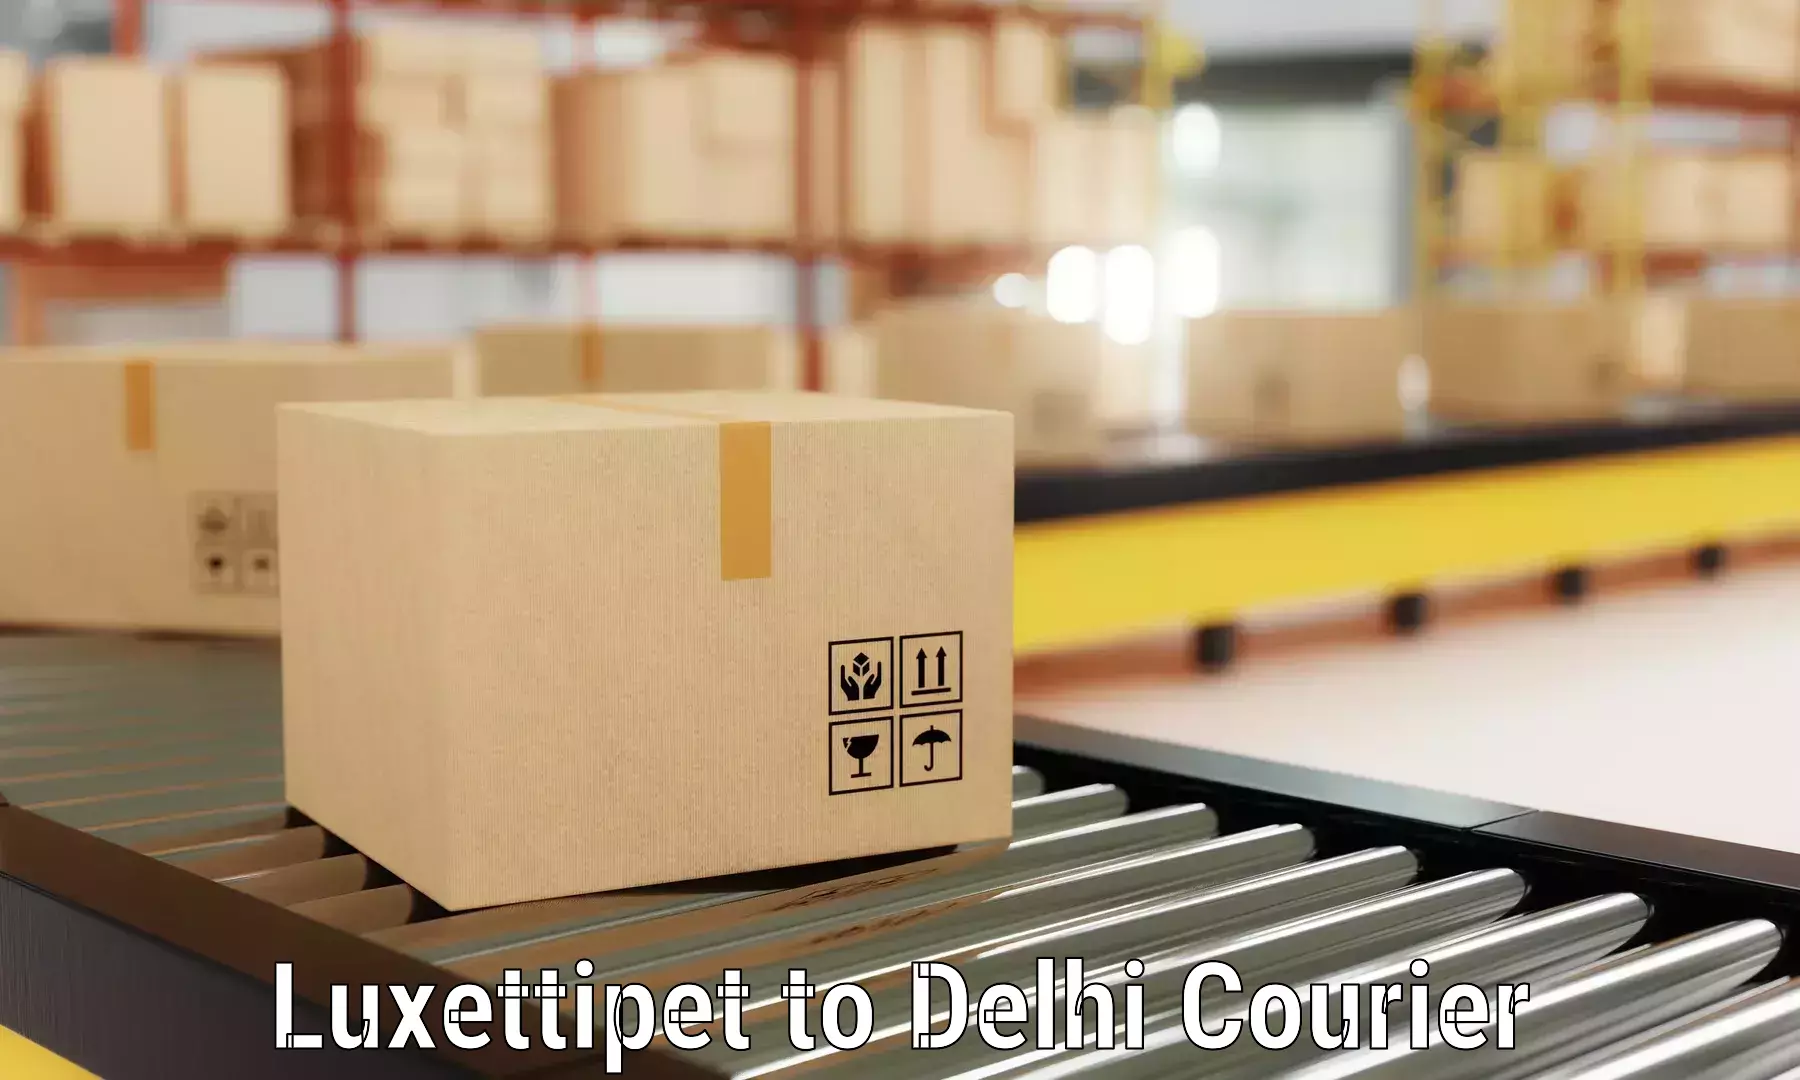 Home relocation experts Luxettipet to University of Delhi